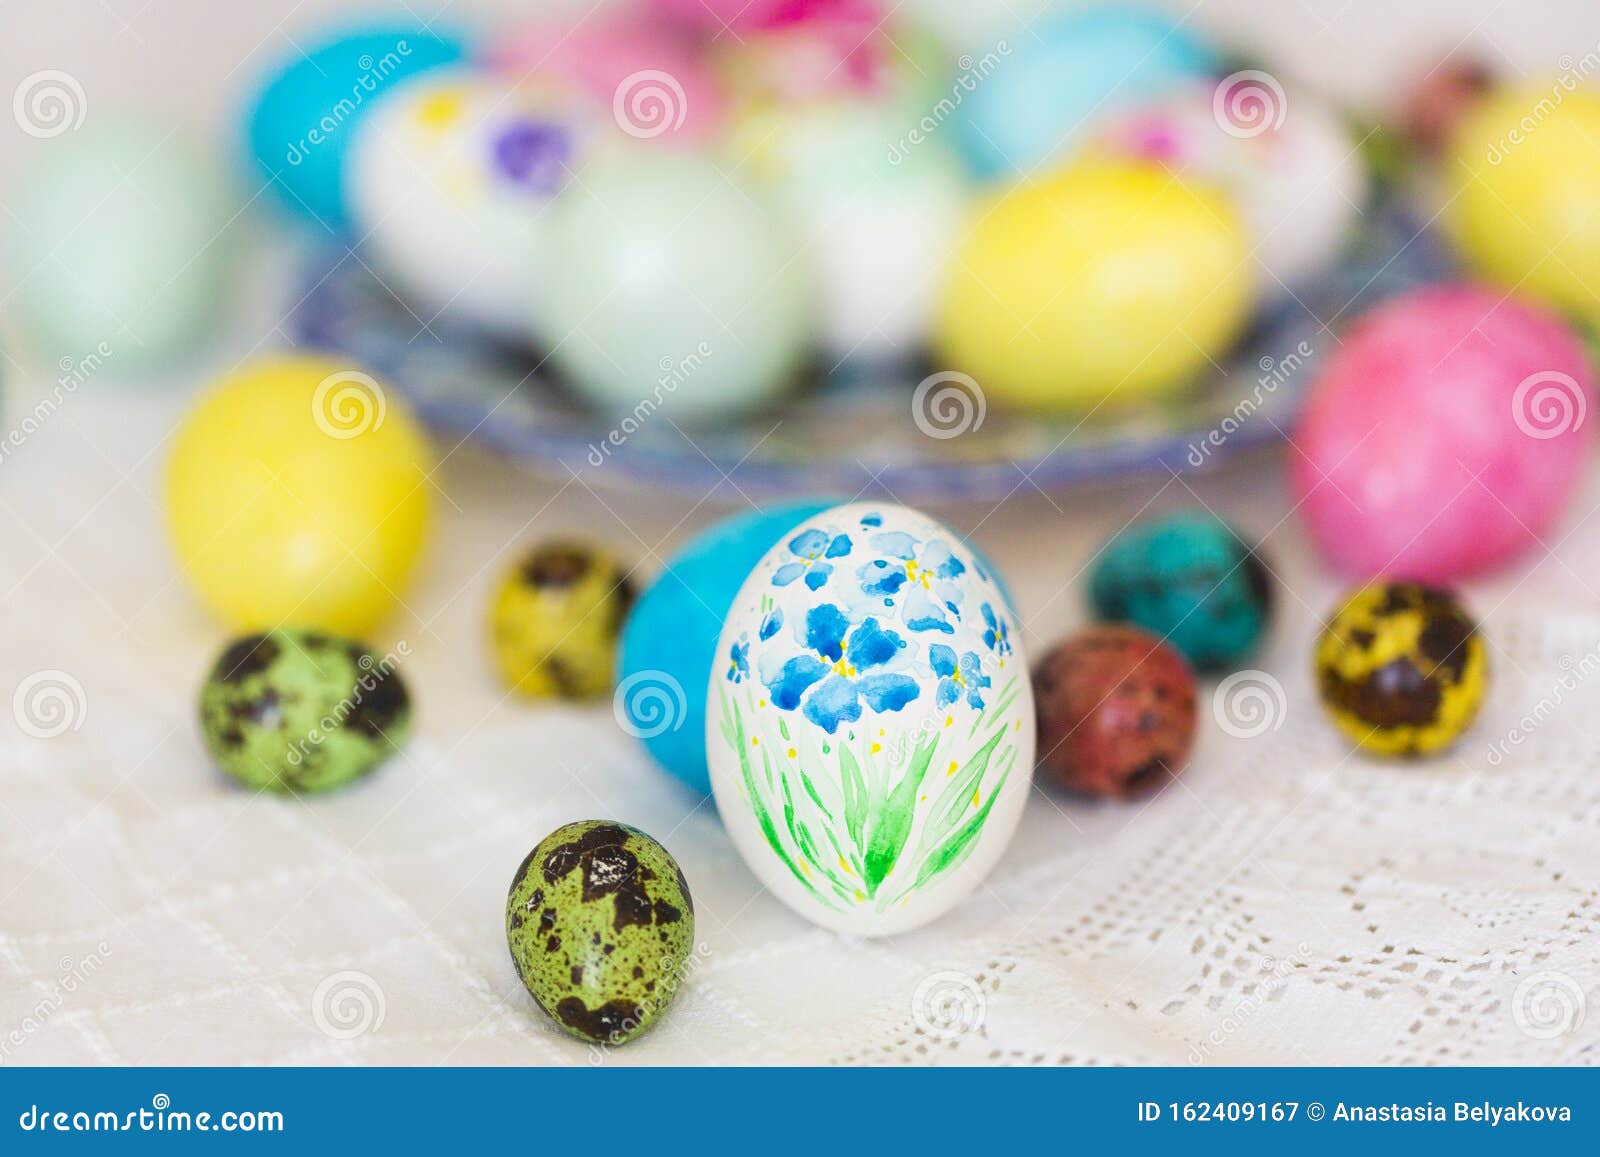 Colorful Hand Painted with Watercolor Easter Eggs with Painting of ...